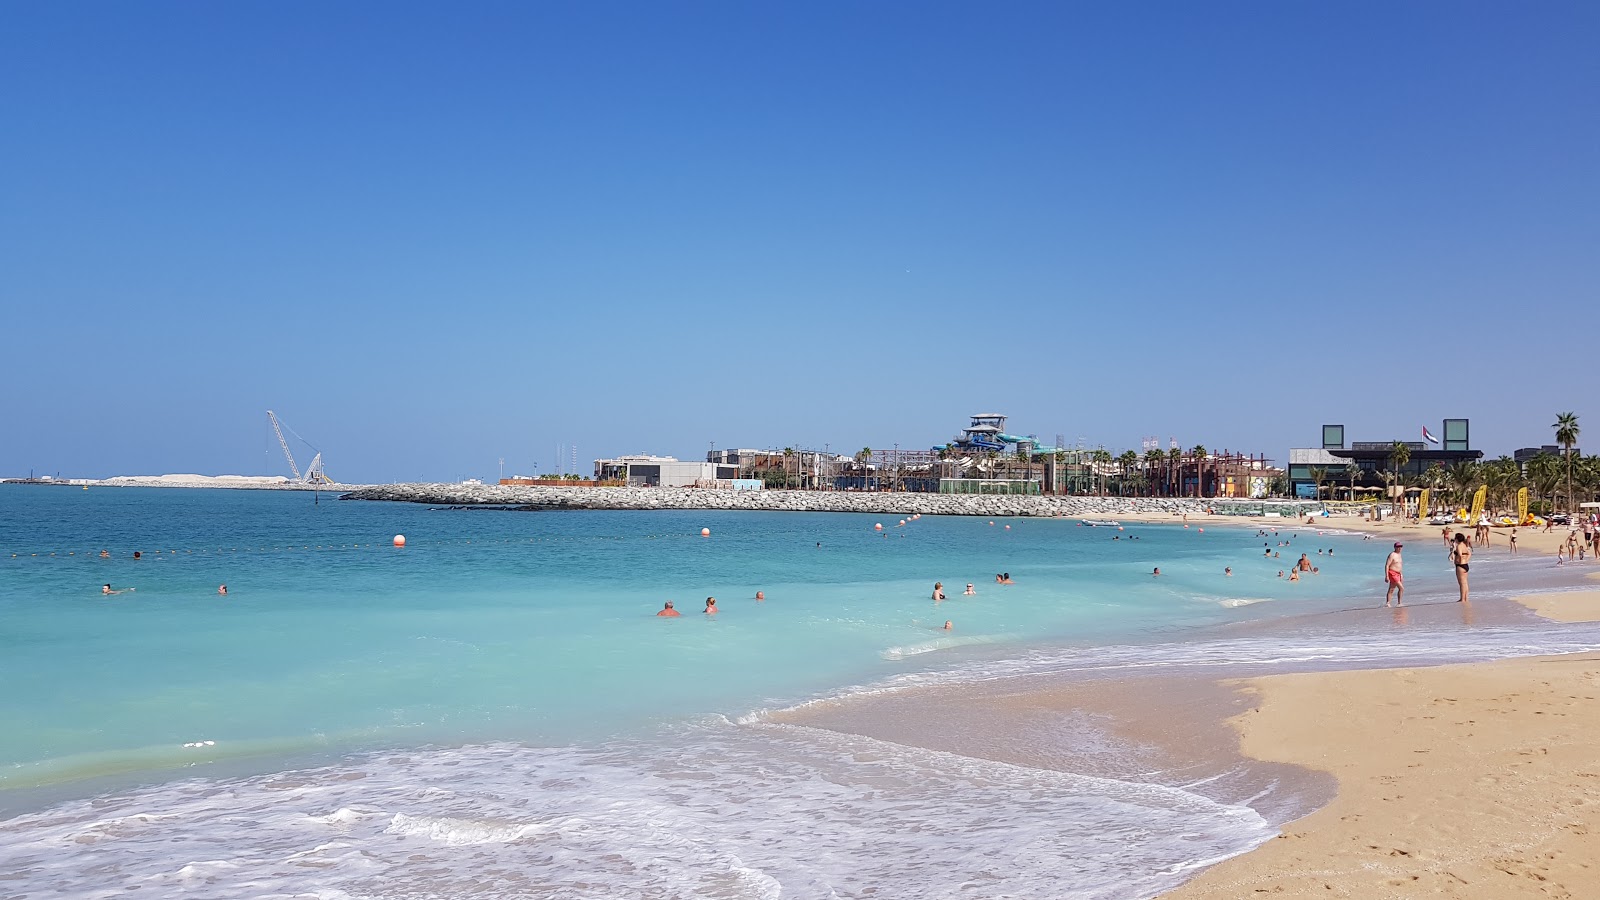 Photo of Lamer beach jumeirah with turquoise pure water surface